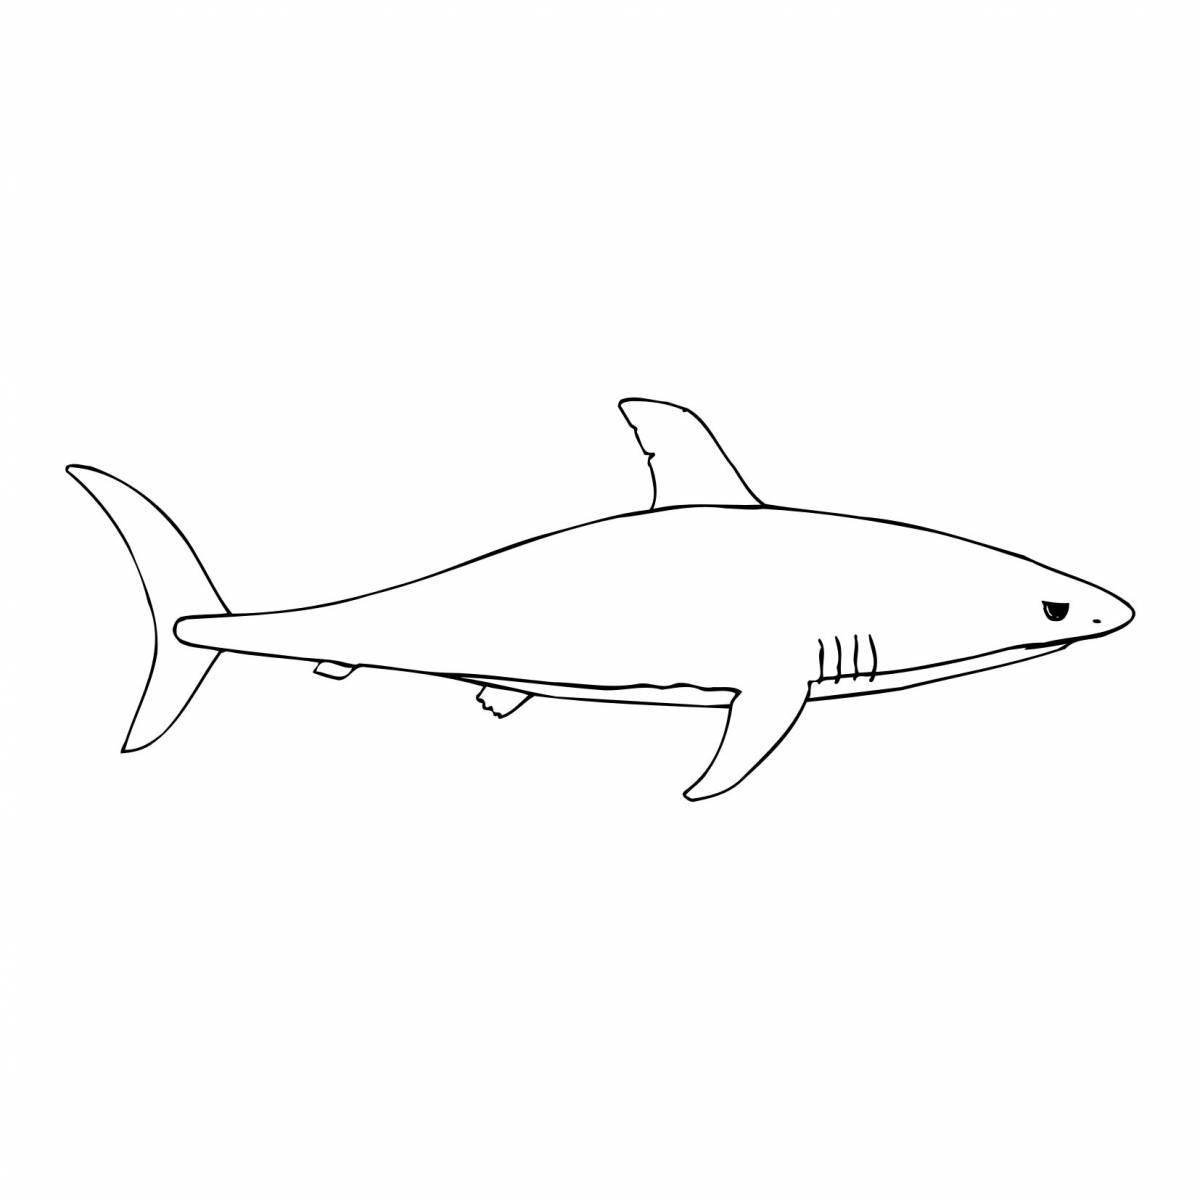 Fascinating shark coloring book from ikea